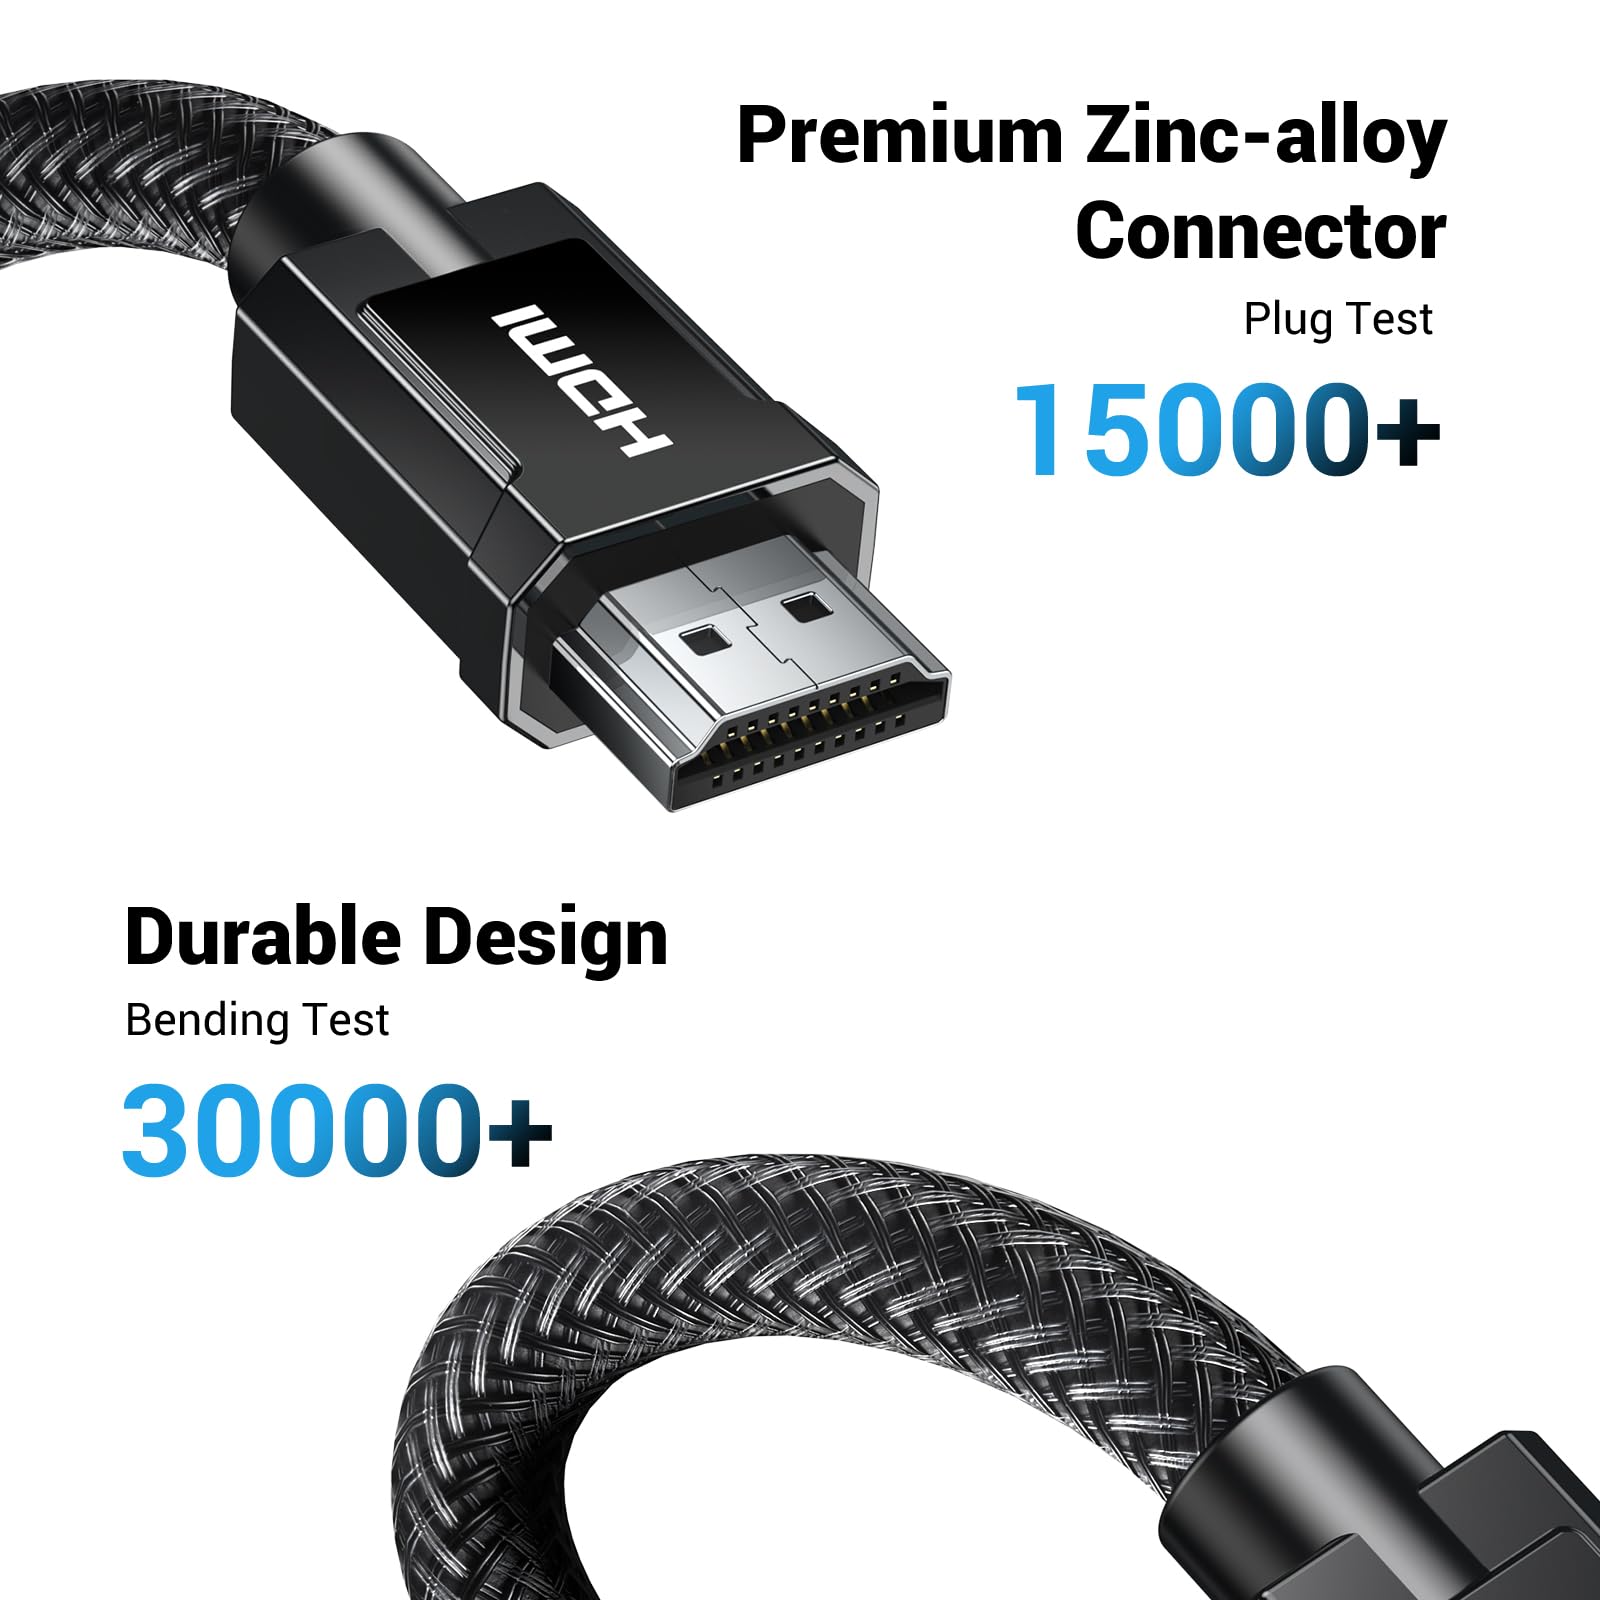 UGREEN 8K Certified HDMI 2.1 Cable 4K 120Hz, 48Gbps HDMI Cable 2.1 Ultra High Speed Support 8K 60Hz, 8K UHD, HDCP, Dynamic HDR, eARC, Dolby Atmos for PS5/4 Pro, Xbox One, Roku, TV Box, HDTV, 6.6 Feet